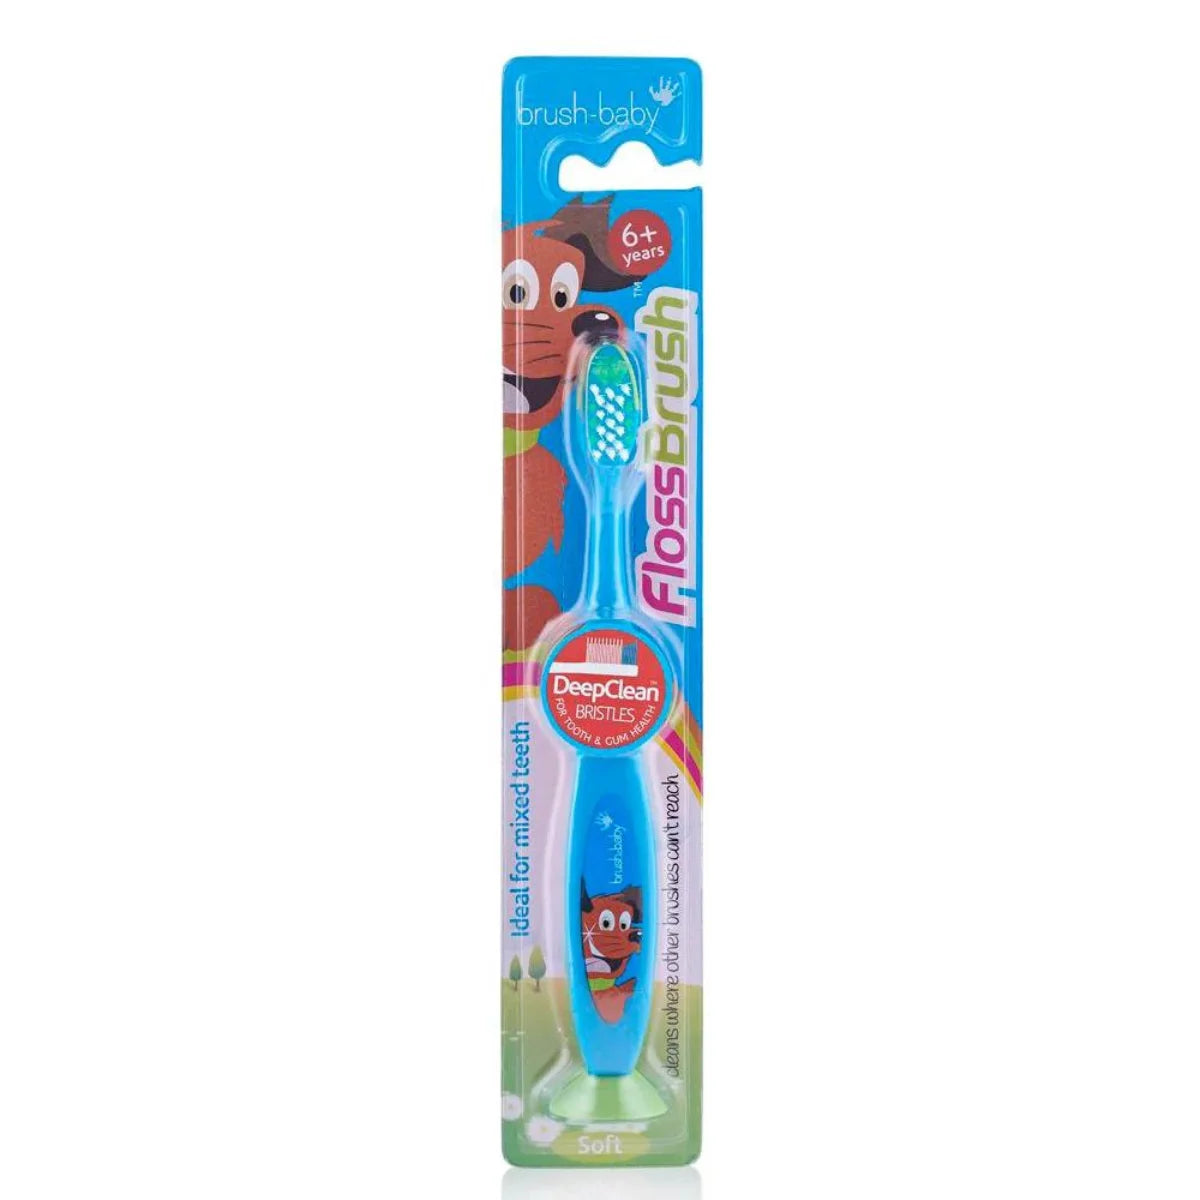 flossbrush_age 6+_blue brush baby best childrens toothbrushes for kids pack